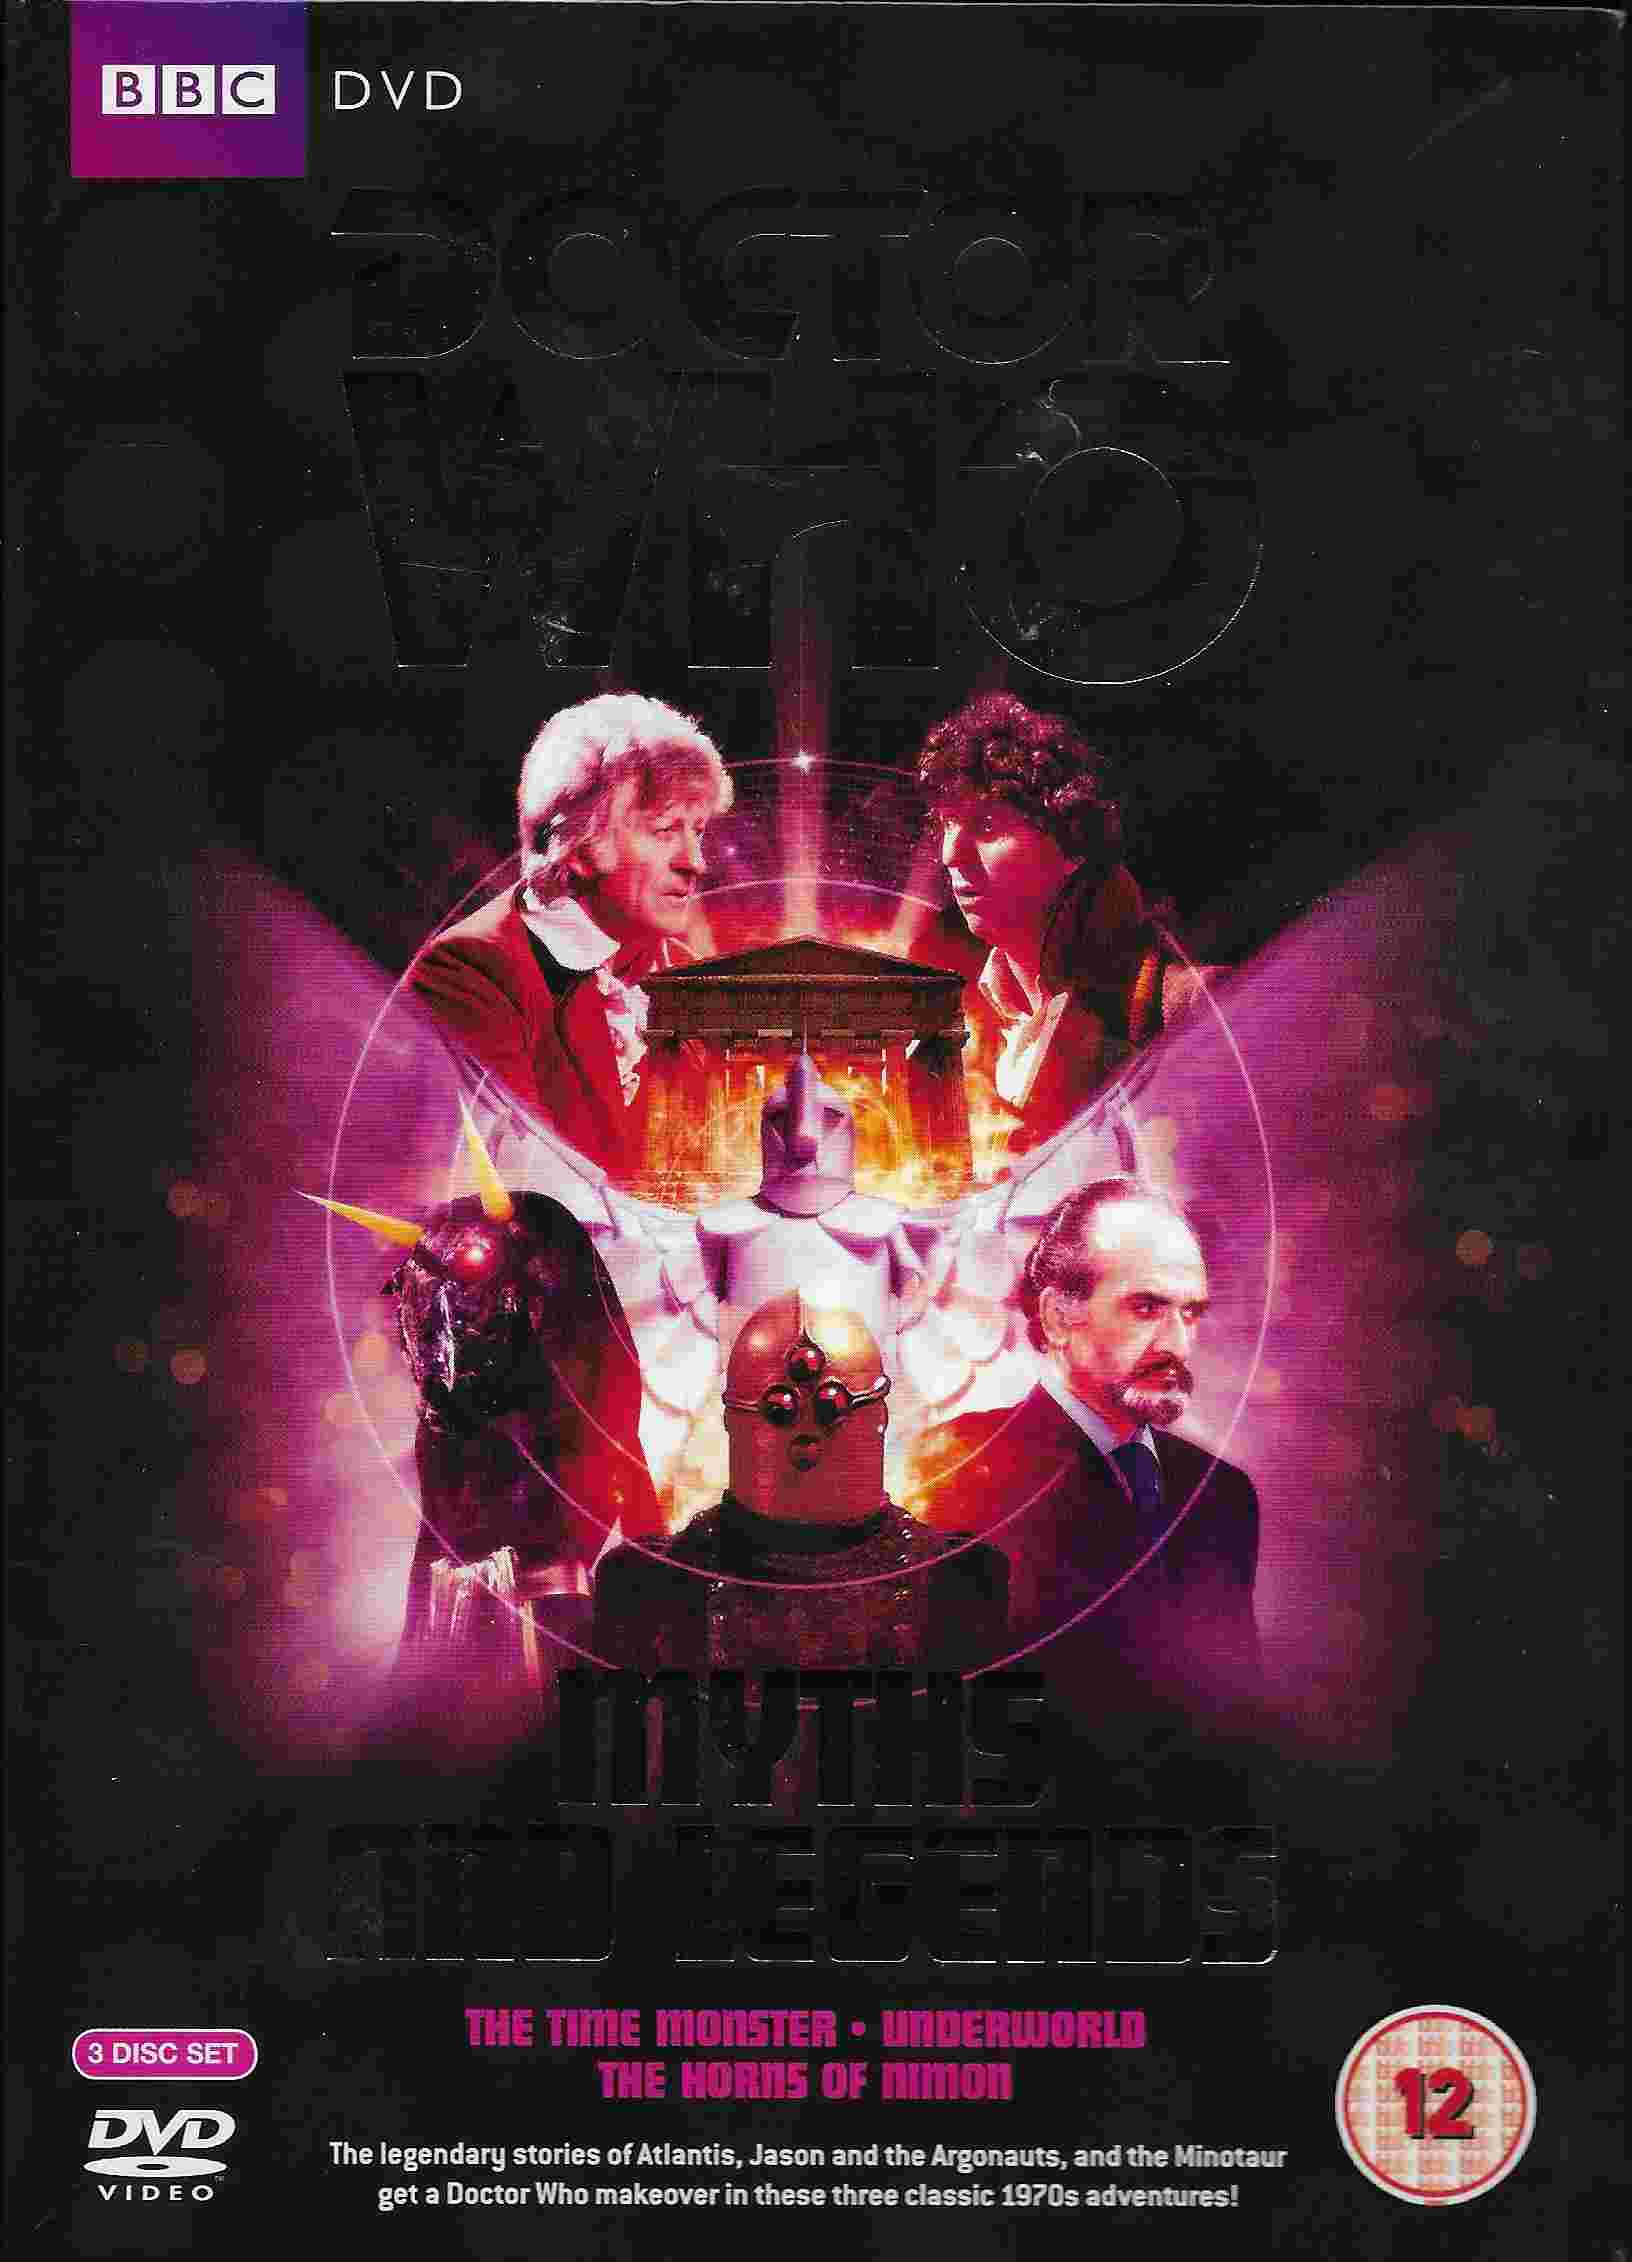 Picture of BBCDVD 2851 Doctor Who - Myths and Legends (Boxed set) by artist Robert Sloman / Bob Baker / Dave Martin / Anthony Read from the BBC dvds - Records and Tapes library